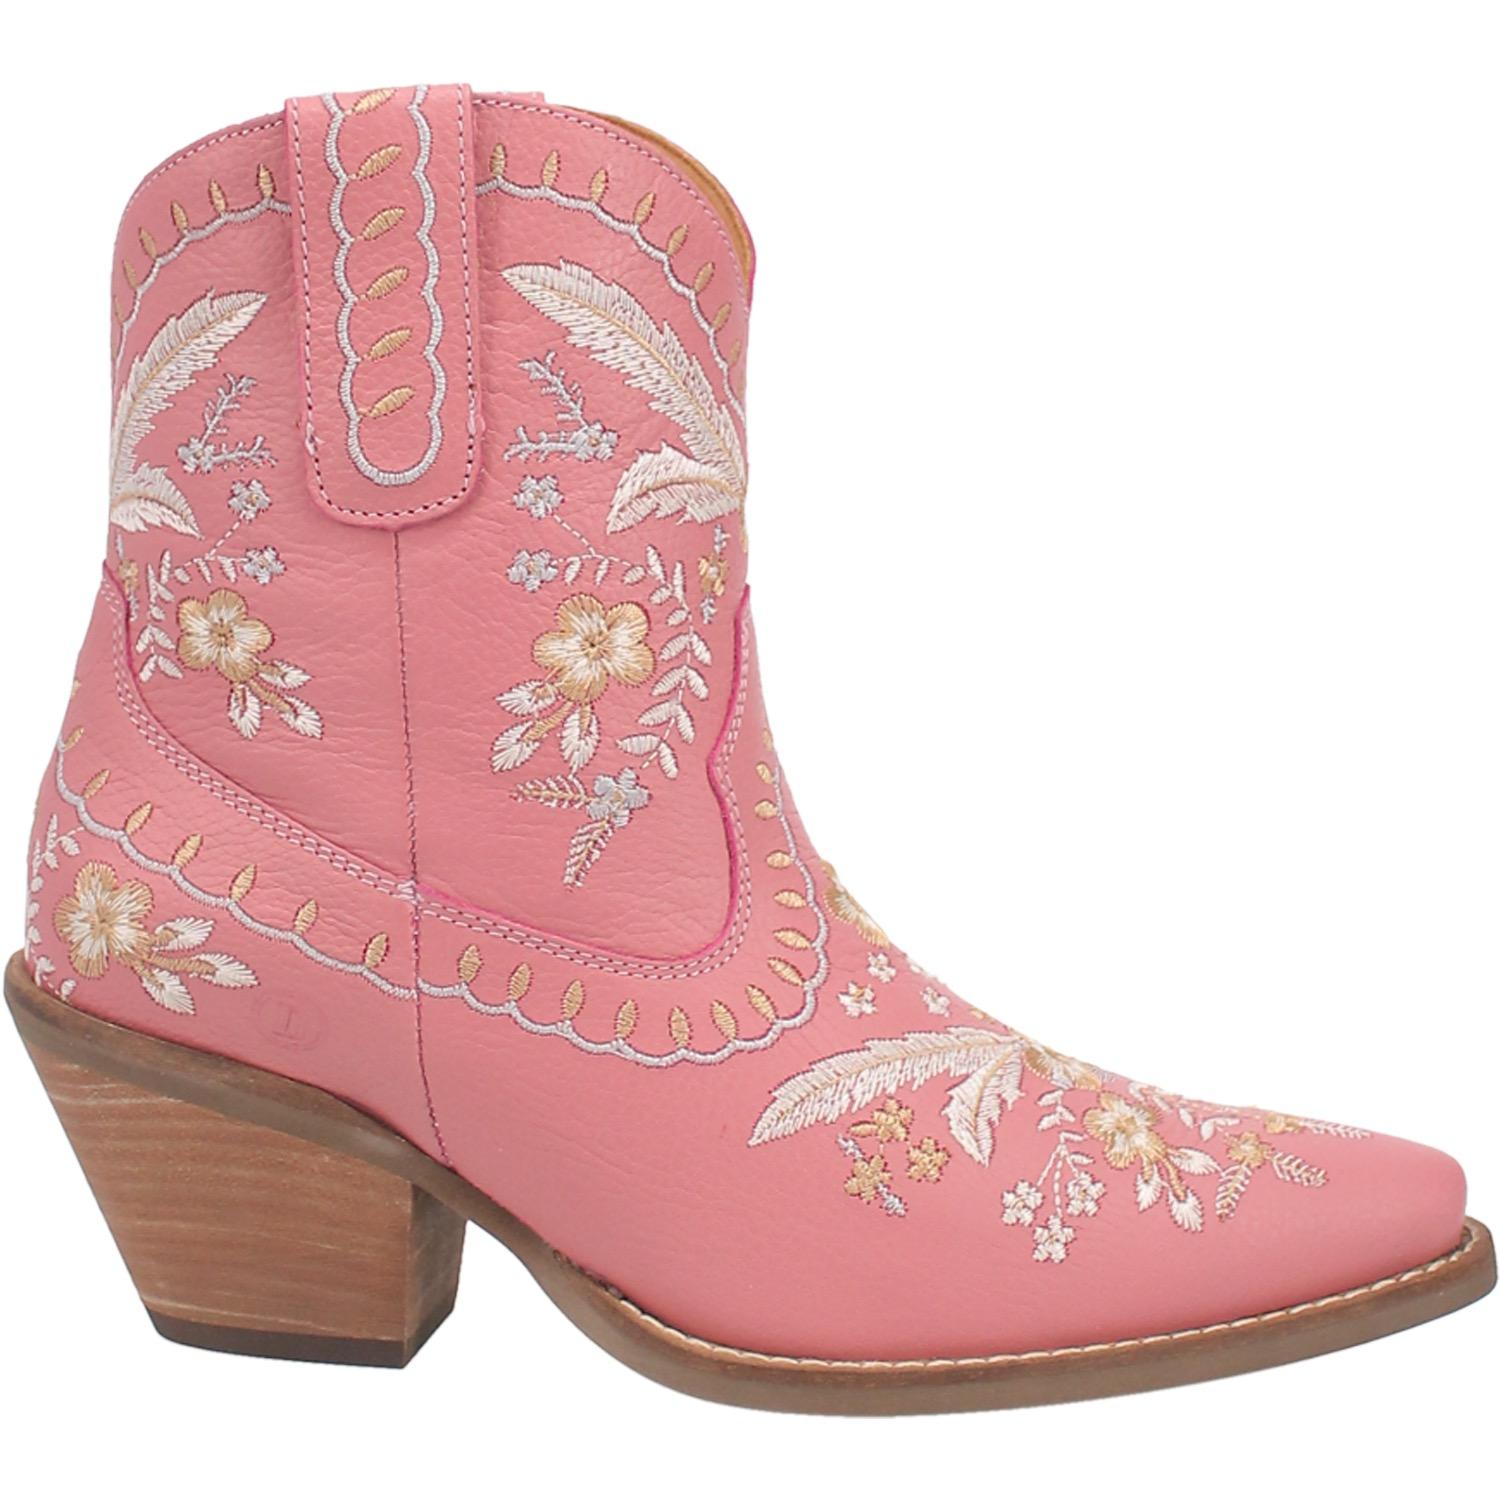 Primrose Pink Leather Boots w/ Stitched Floral Designs (DS)